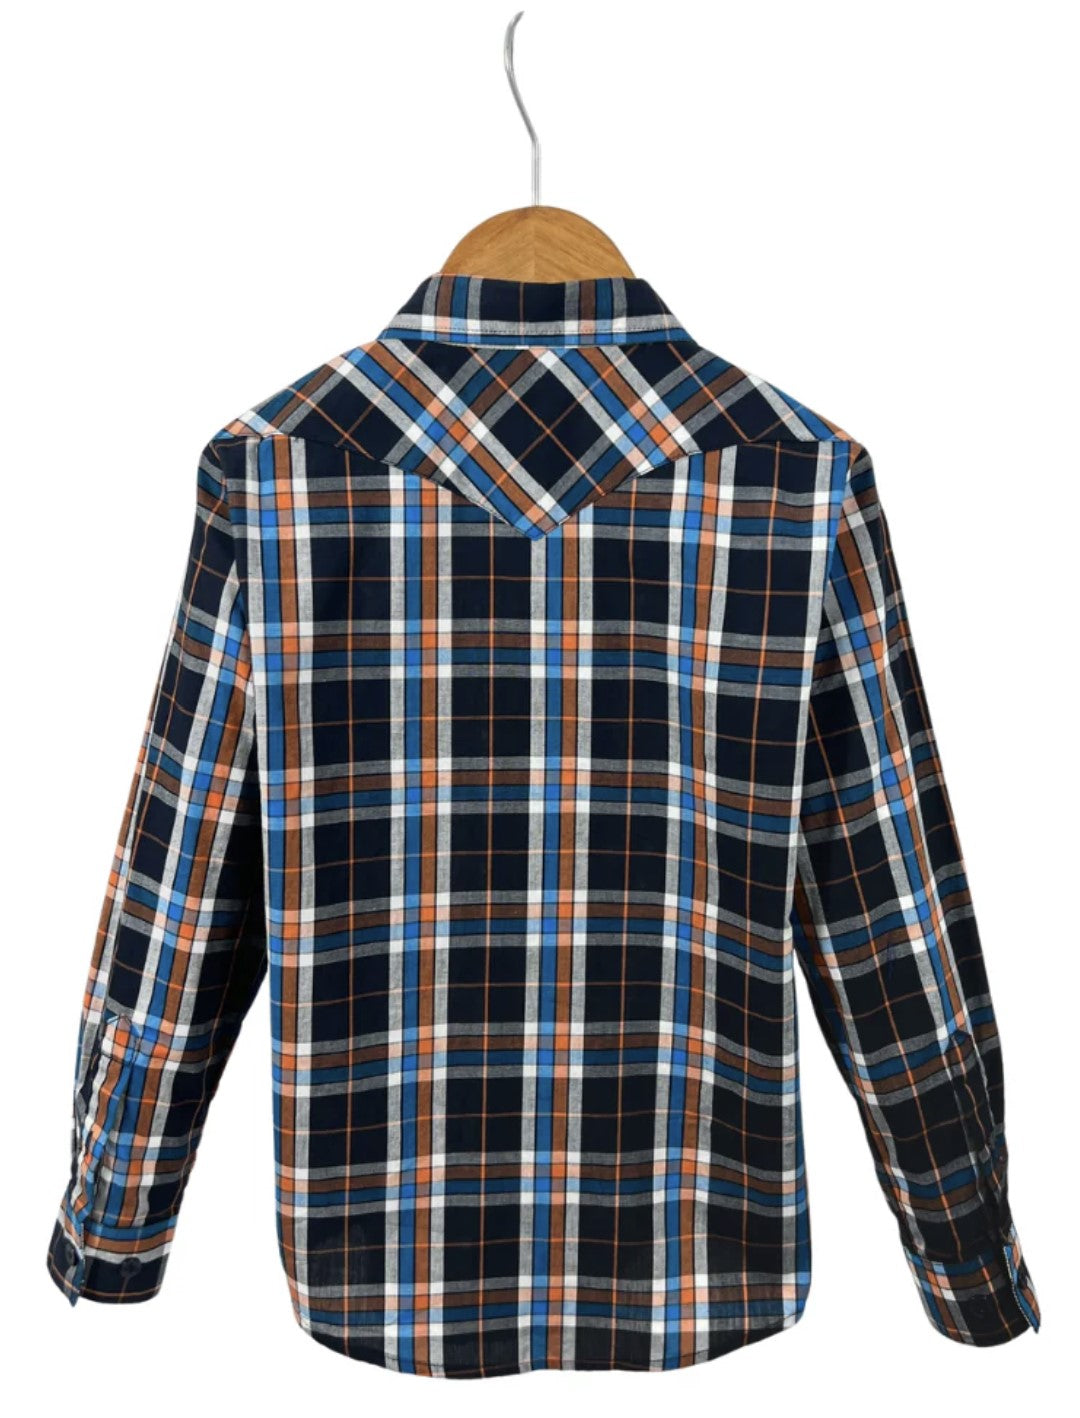 Jai - Country Classic Checked Long Sleeve Shirt - Baby & Toddler